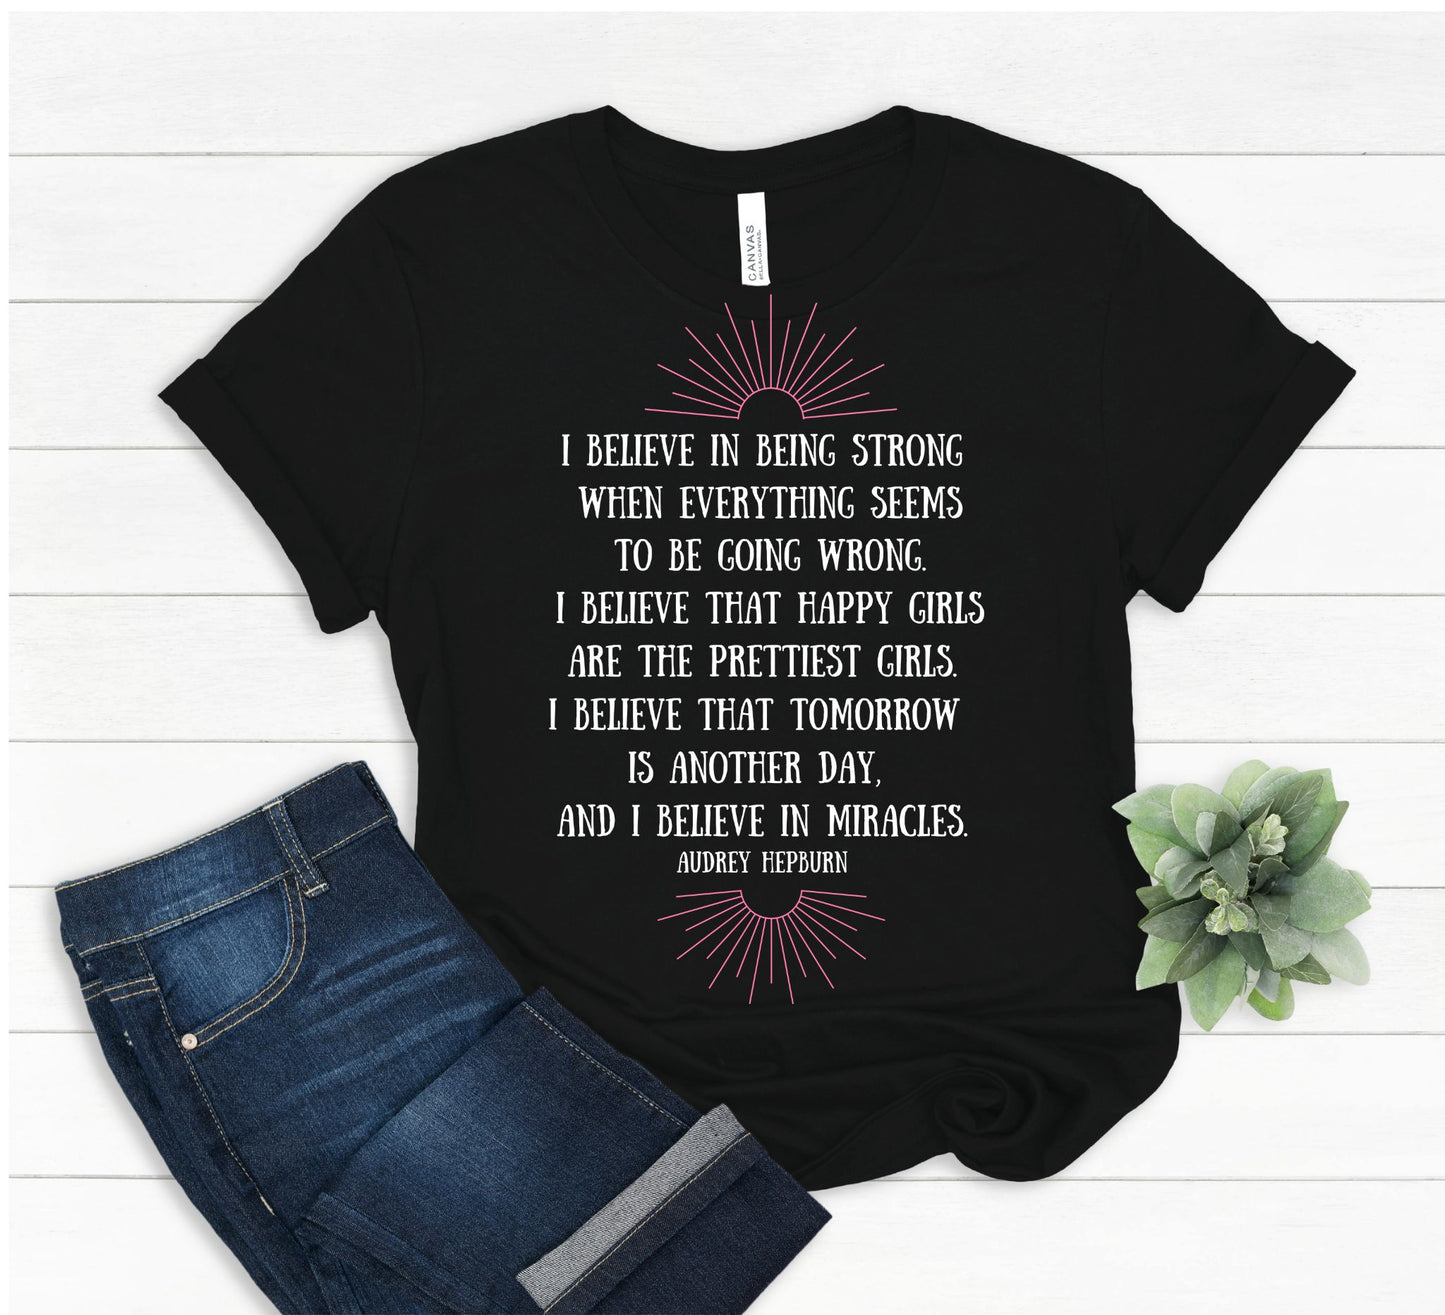 Be Strong T-Shirt - Believe Me